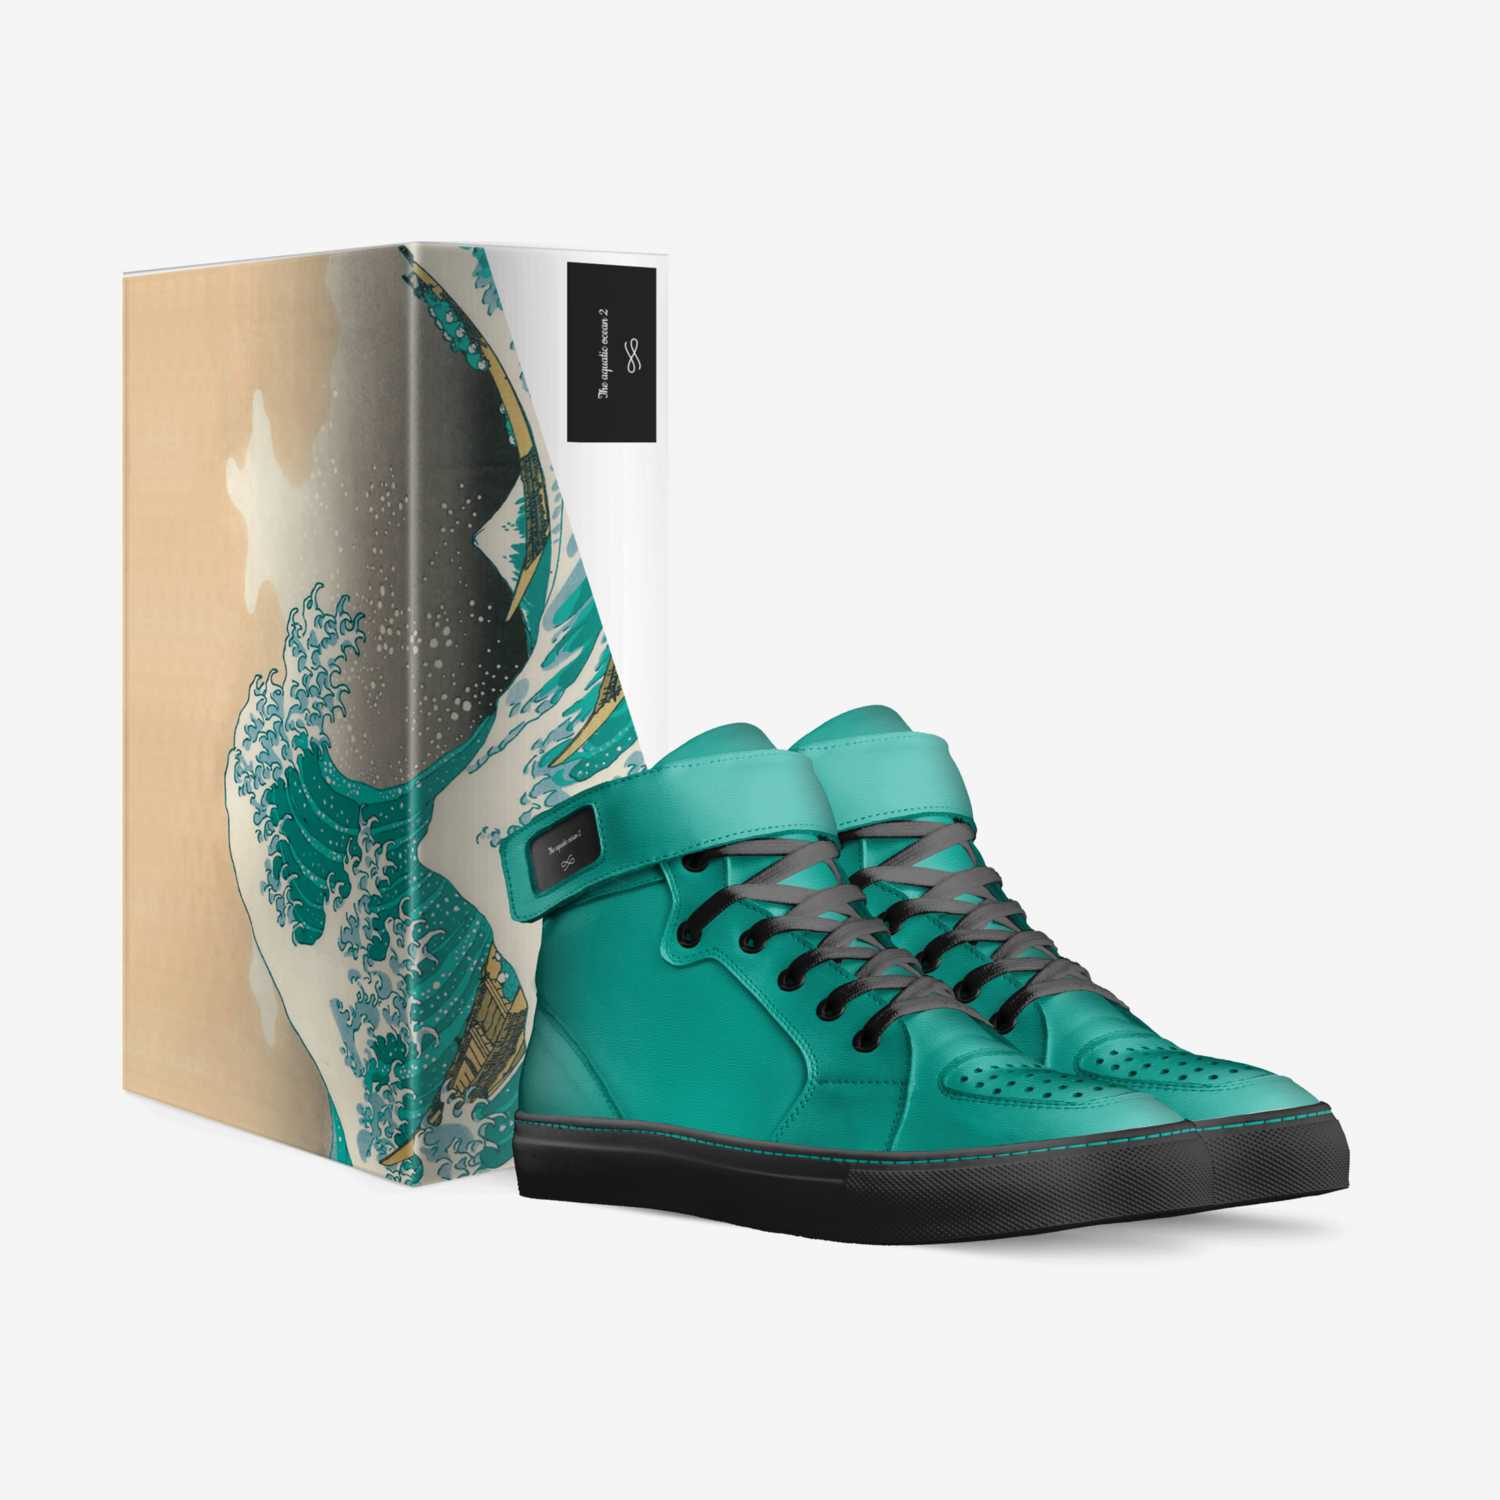 The aquatic ocean 2 custom made in Italy shoes by Colby Miller | Box view